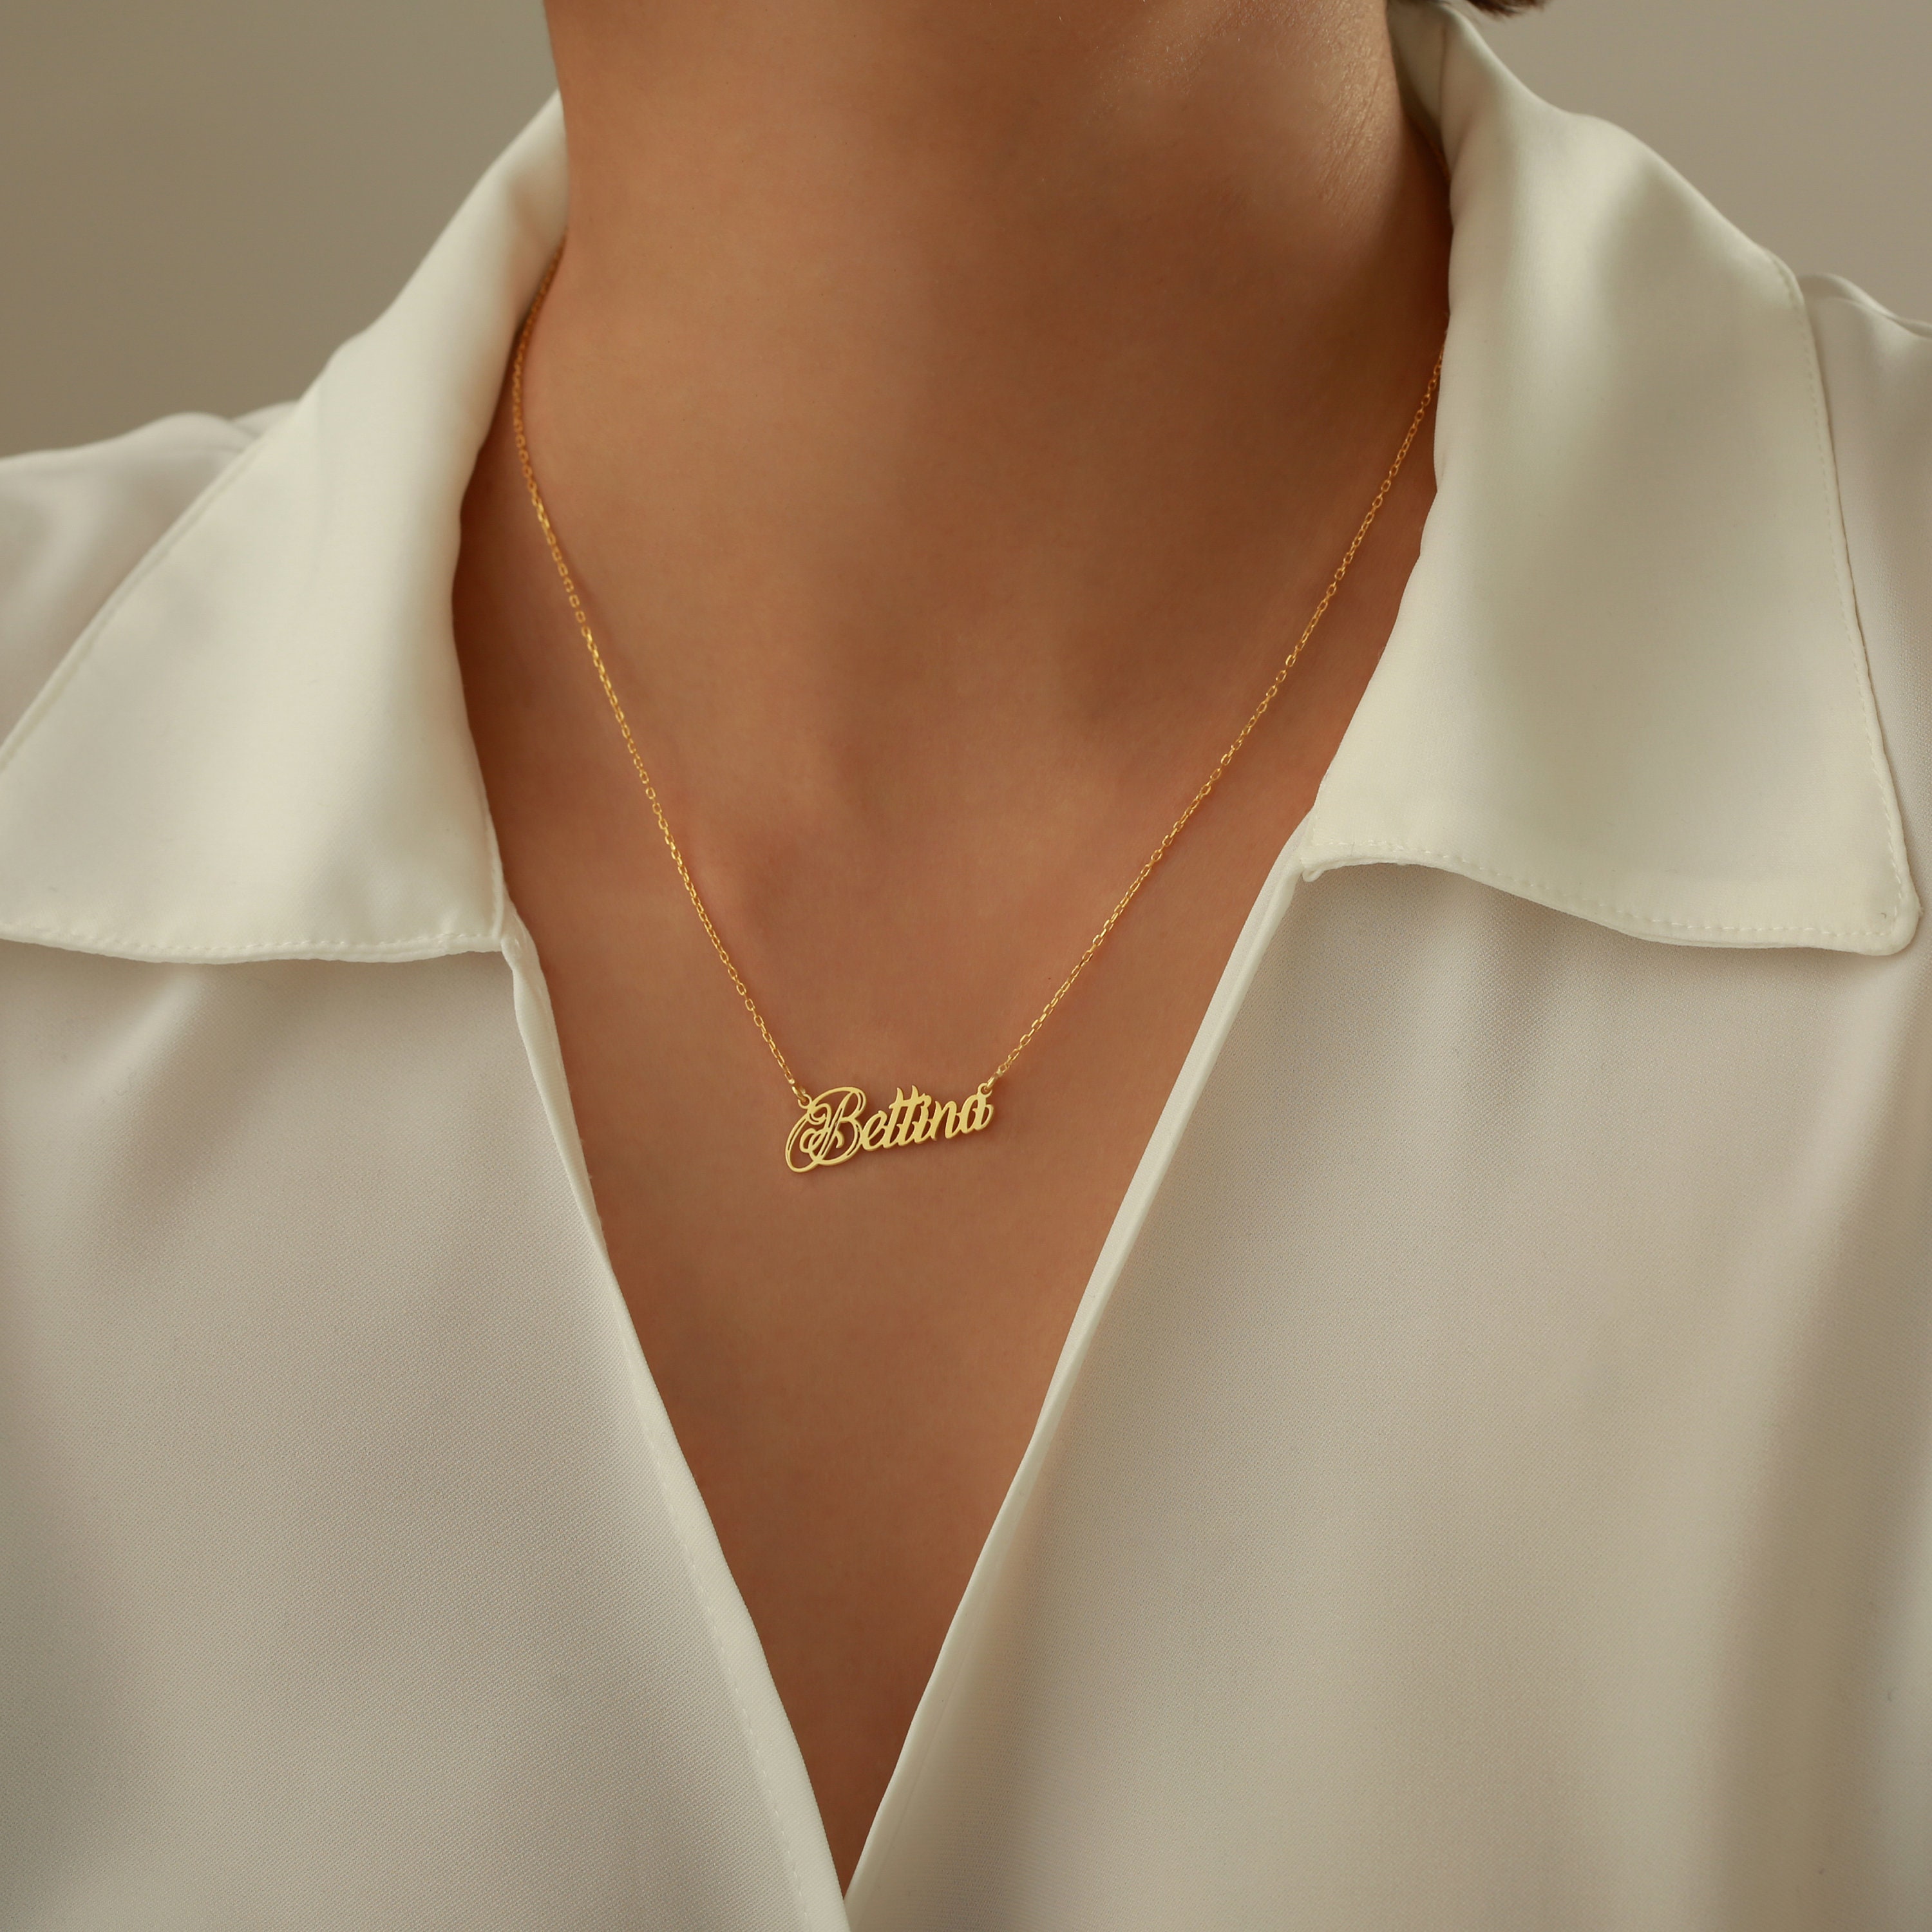 14K 585 Gold Name Necklace With Desired Name Made of Real